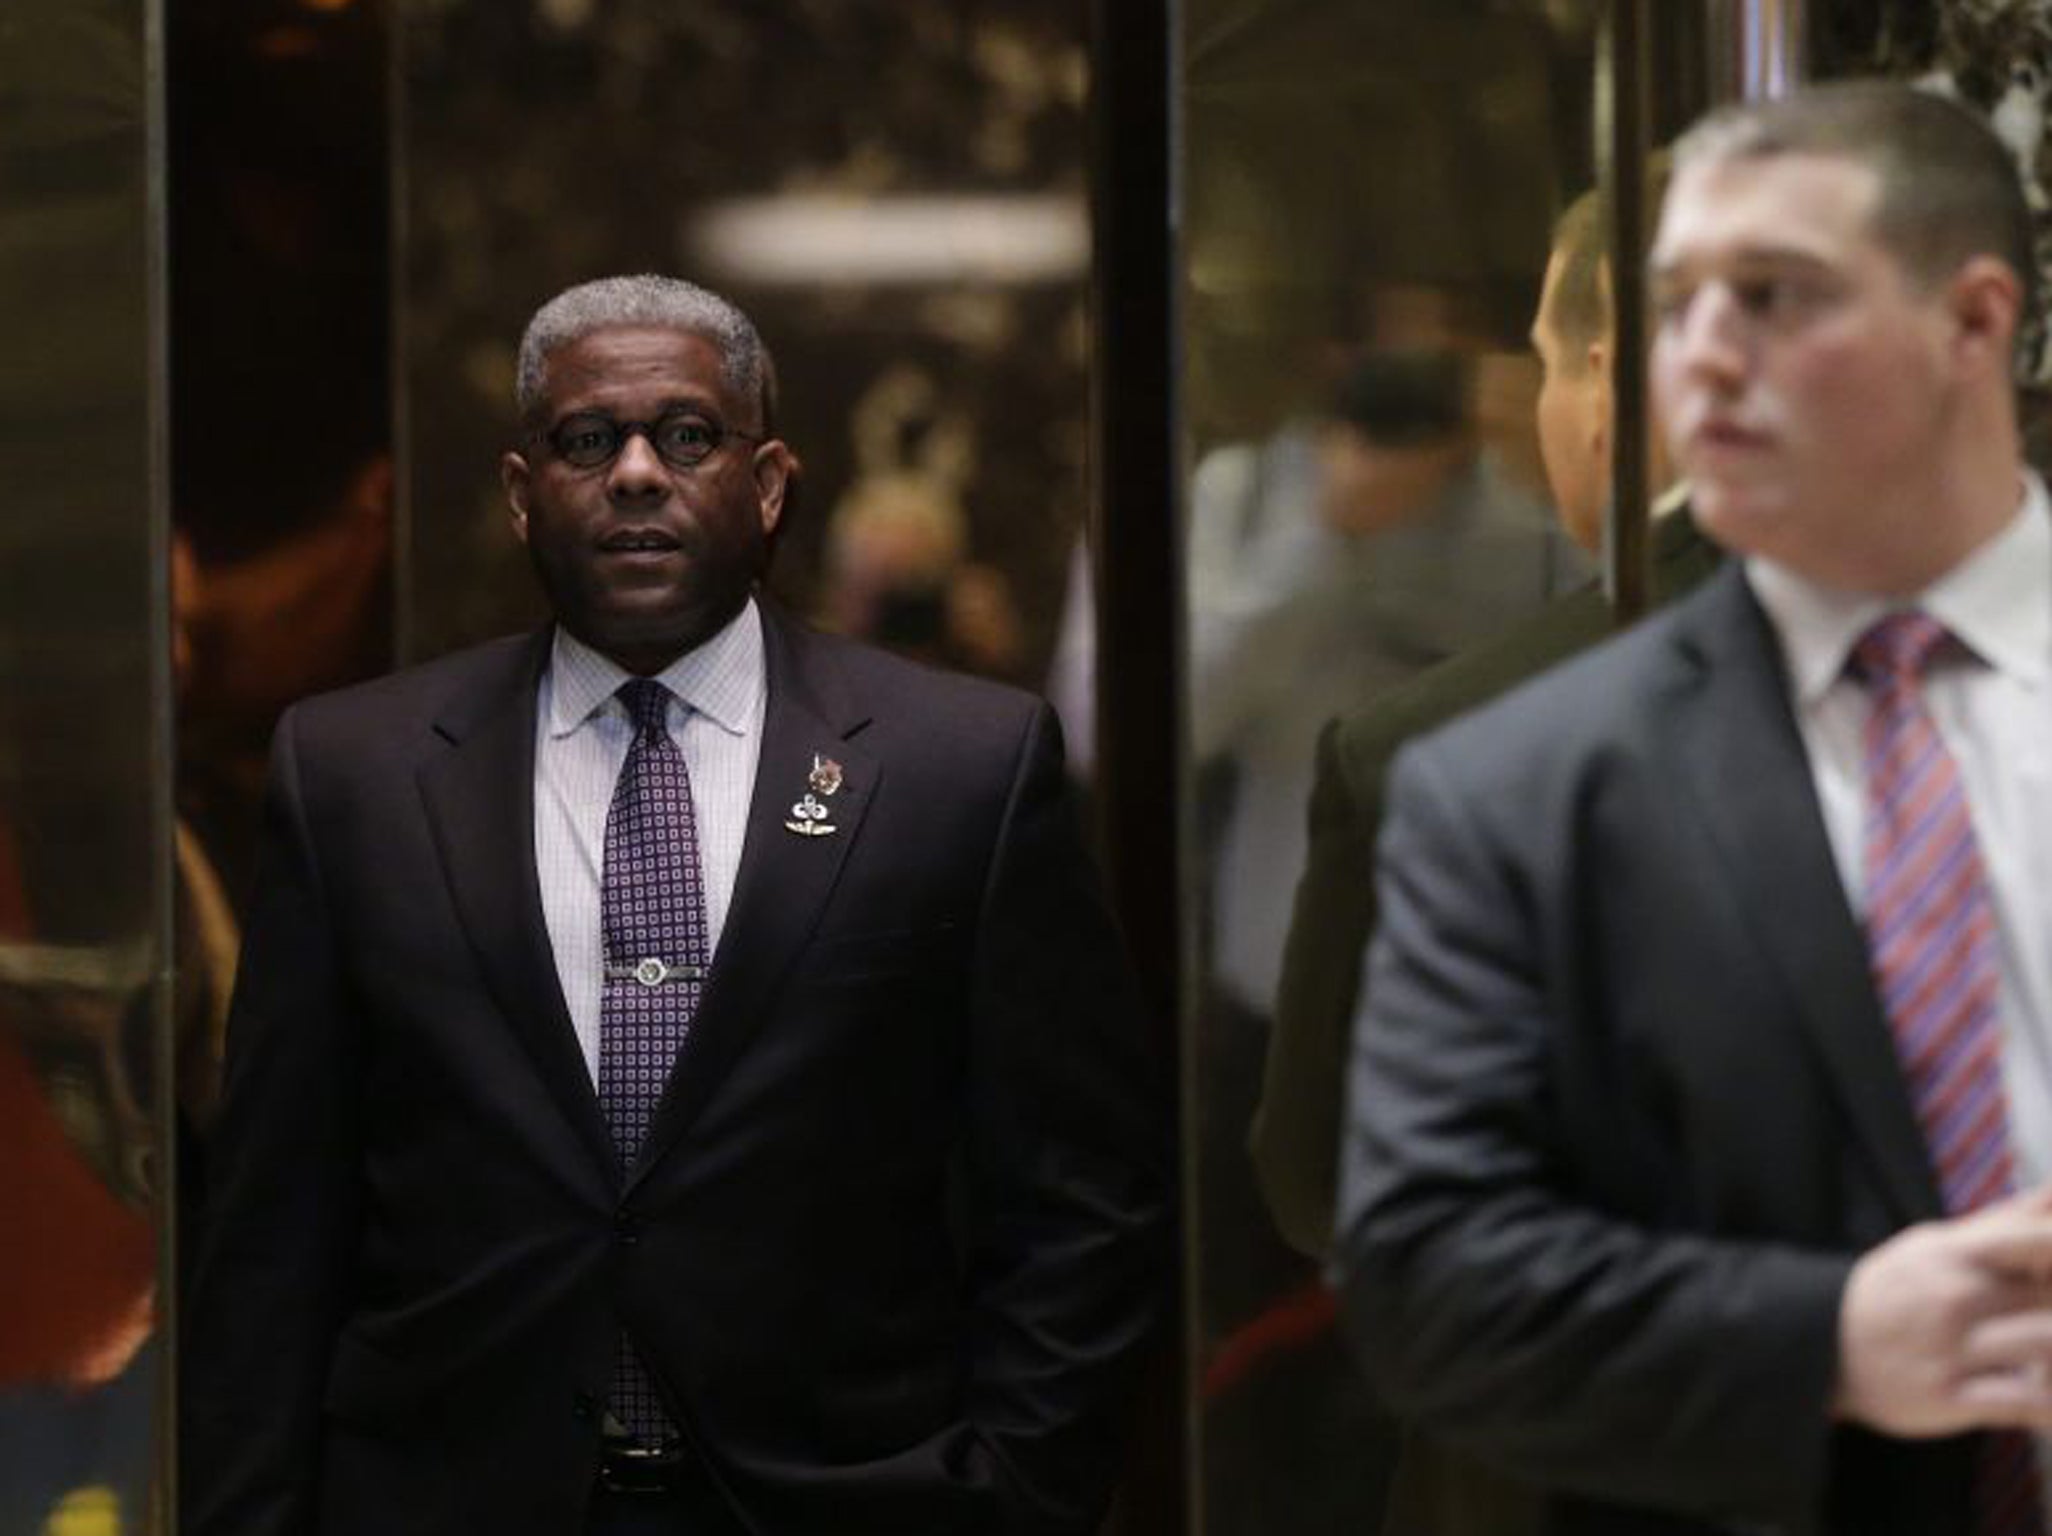 Former US Representative Allen West stands in an elevator as he arrives at Trump Tower in New York City